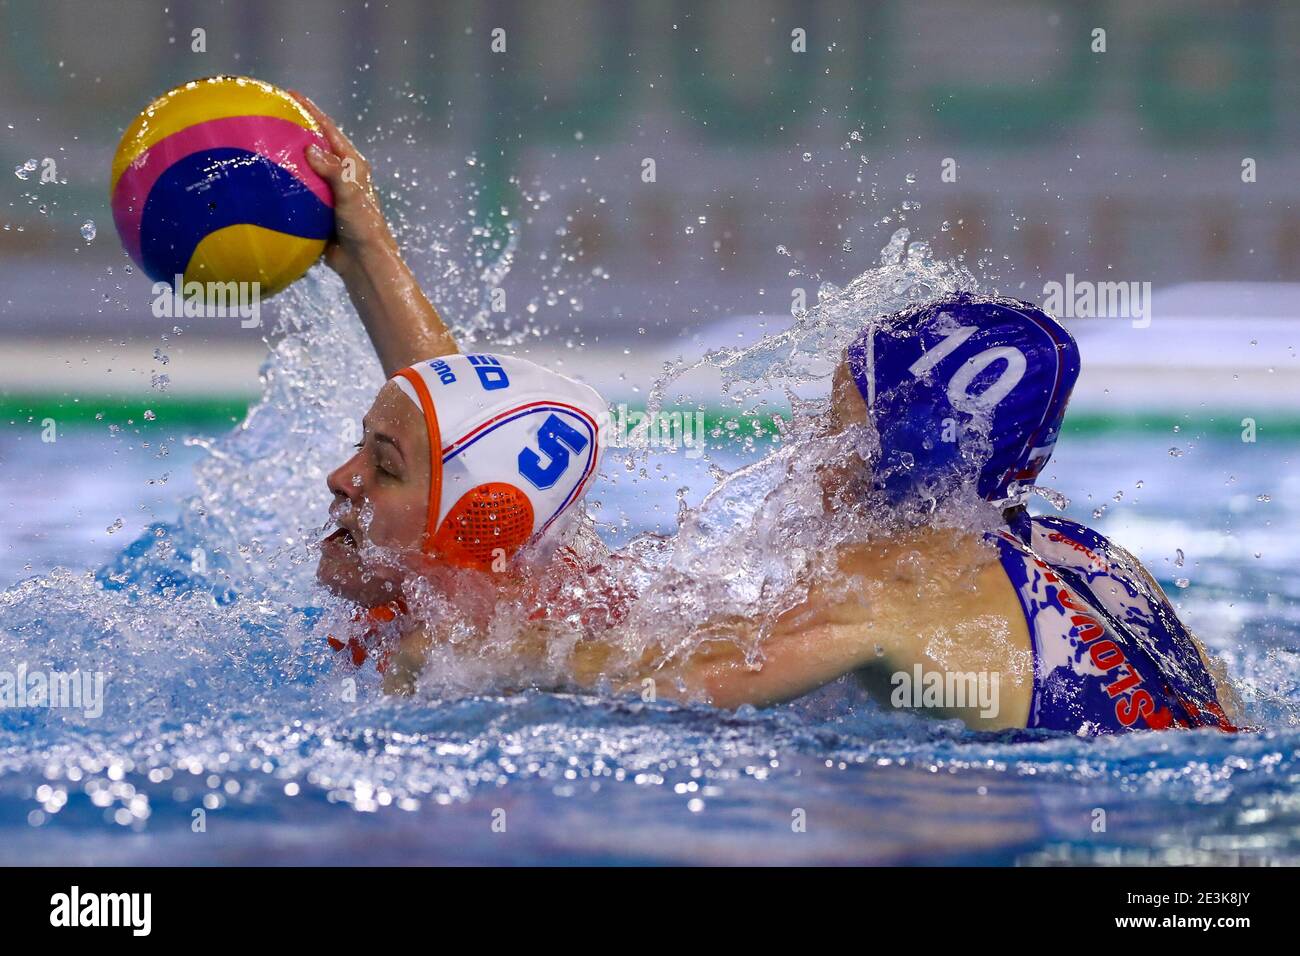 TRIESTE, ITALY - JANUARY 19: Iris Wolves of Netherlands, Ivana Majlathova of Slovakia during the match between Netherlands and Slovakia at Women's Water Polo Olympic Games Qualification Tournament at Bruno Bianchi Aquatic Center on January 19, 2021 in Trieste, Italy (Photo by Marcel ter Bals/Orange Pictures/Alamy Live News) Stock Photo